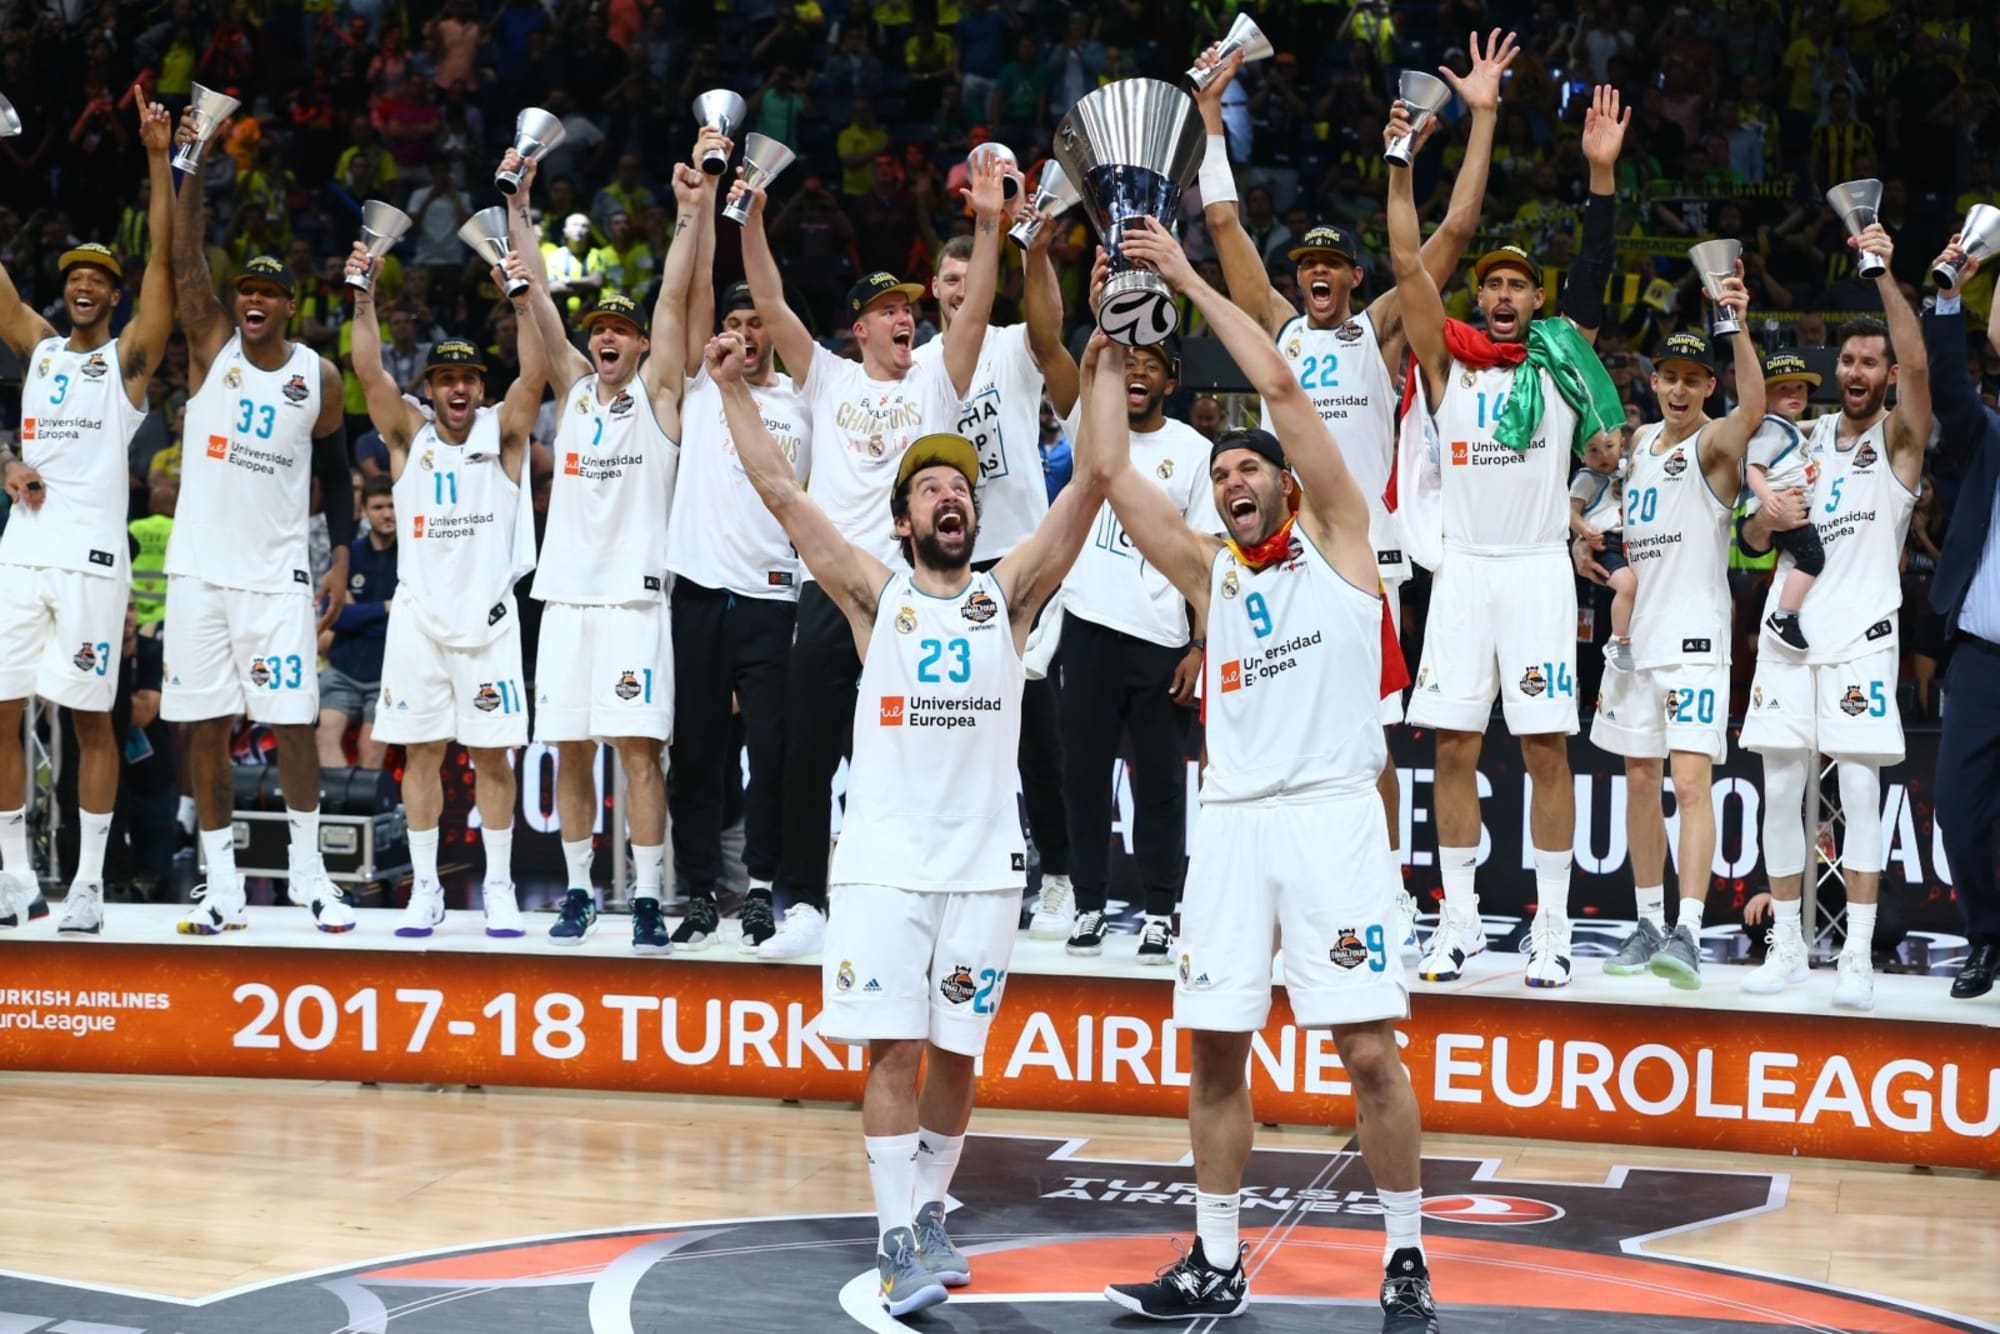 Real Madrid basketball wins their 10th Euro League title thanks to Luka Doncic